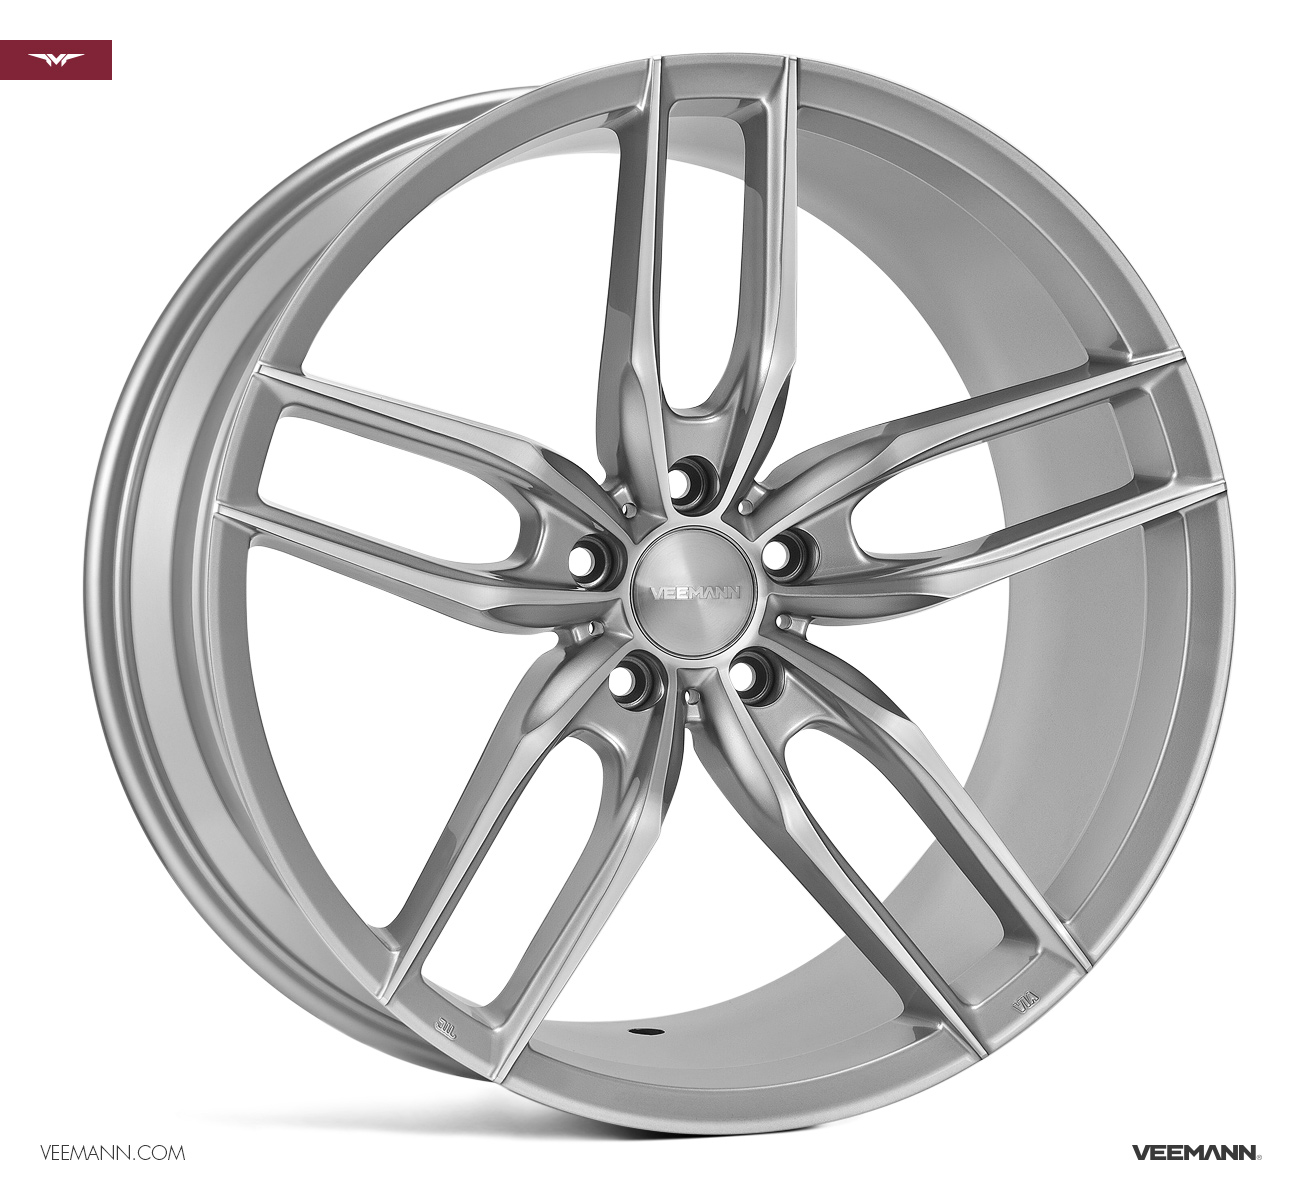 NEW 20" VEEMANN V-FS28 ALLOY WHEELS IN SILVER POL WITH DEEPER CONCAVE 10" REARS